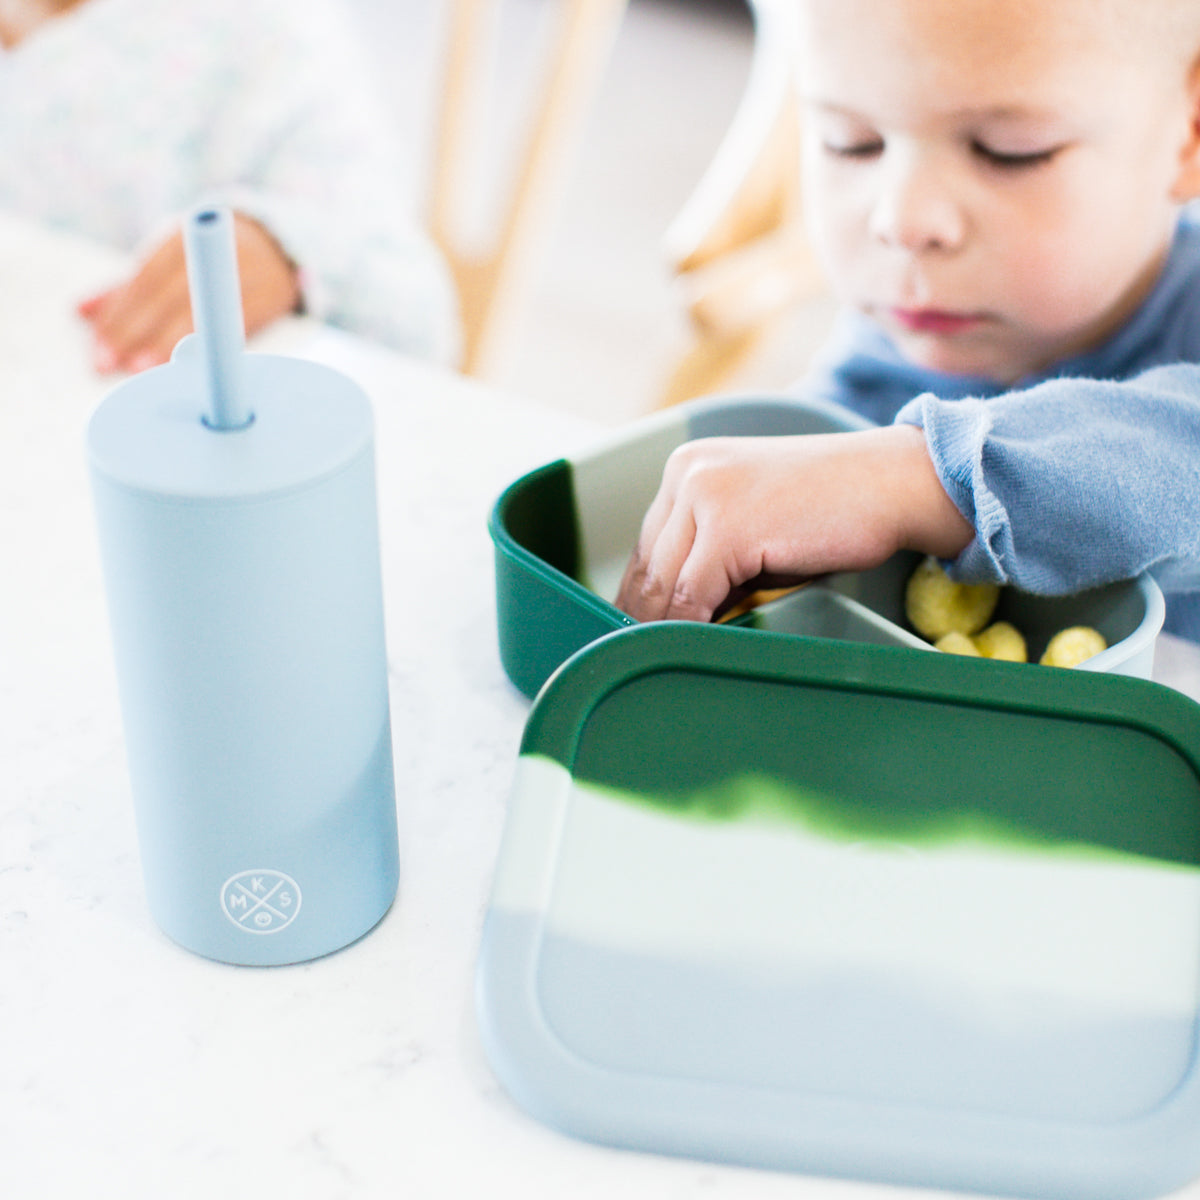 Durable silicone bpa free lunch bento box for kids and adults by MKS Miminoo Gilbert Arizona USA marble effect flagstaff green and grey for boys and girls snacks on the go